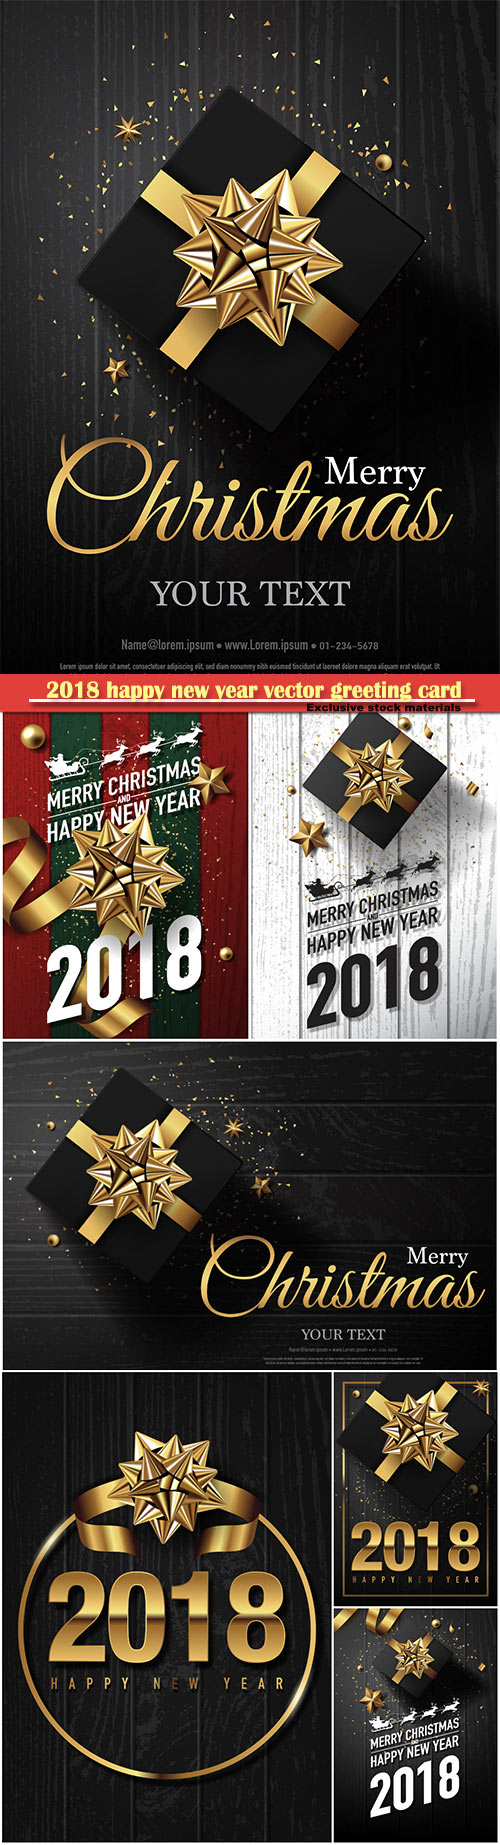 2018 happy new year vector greeting card